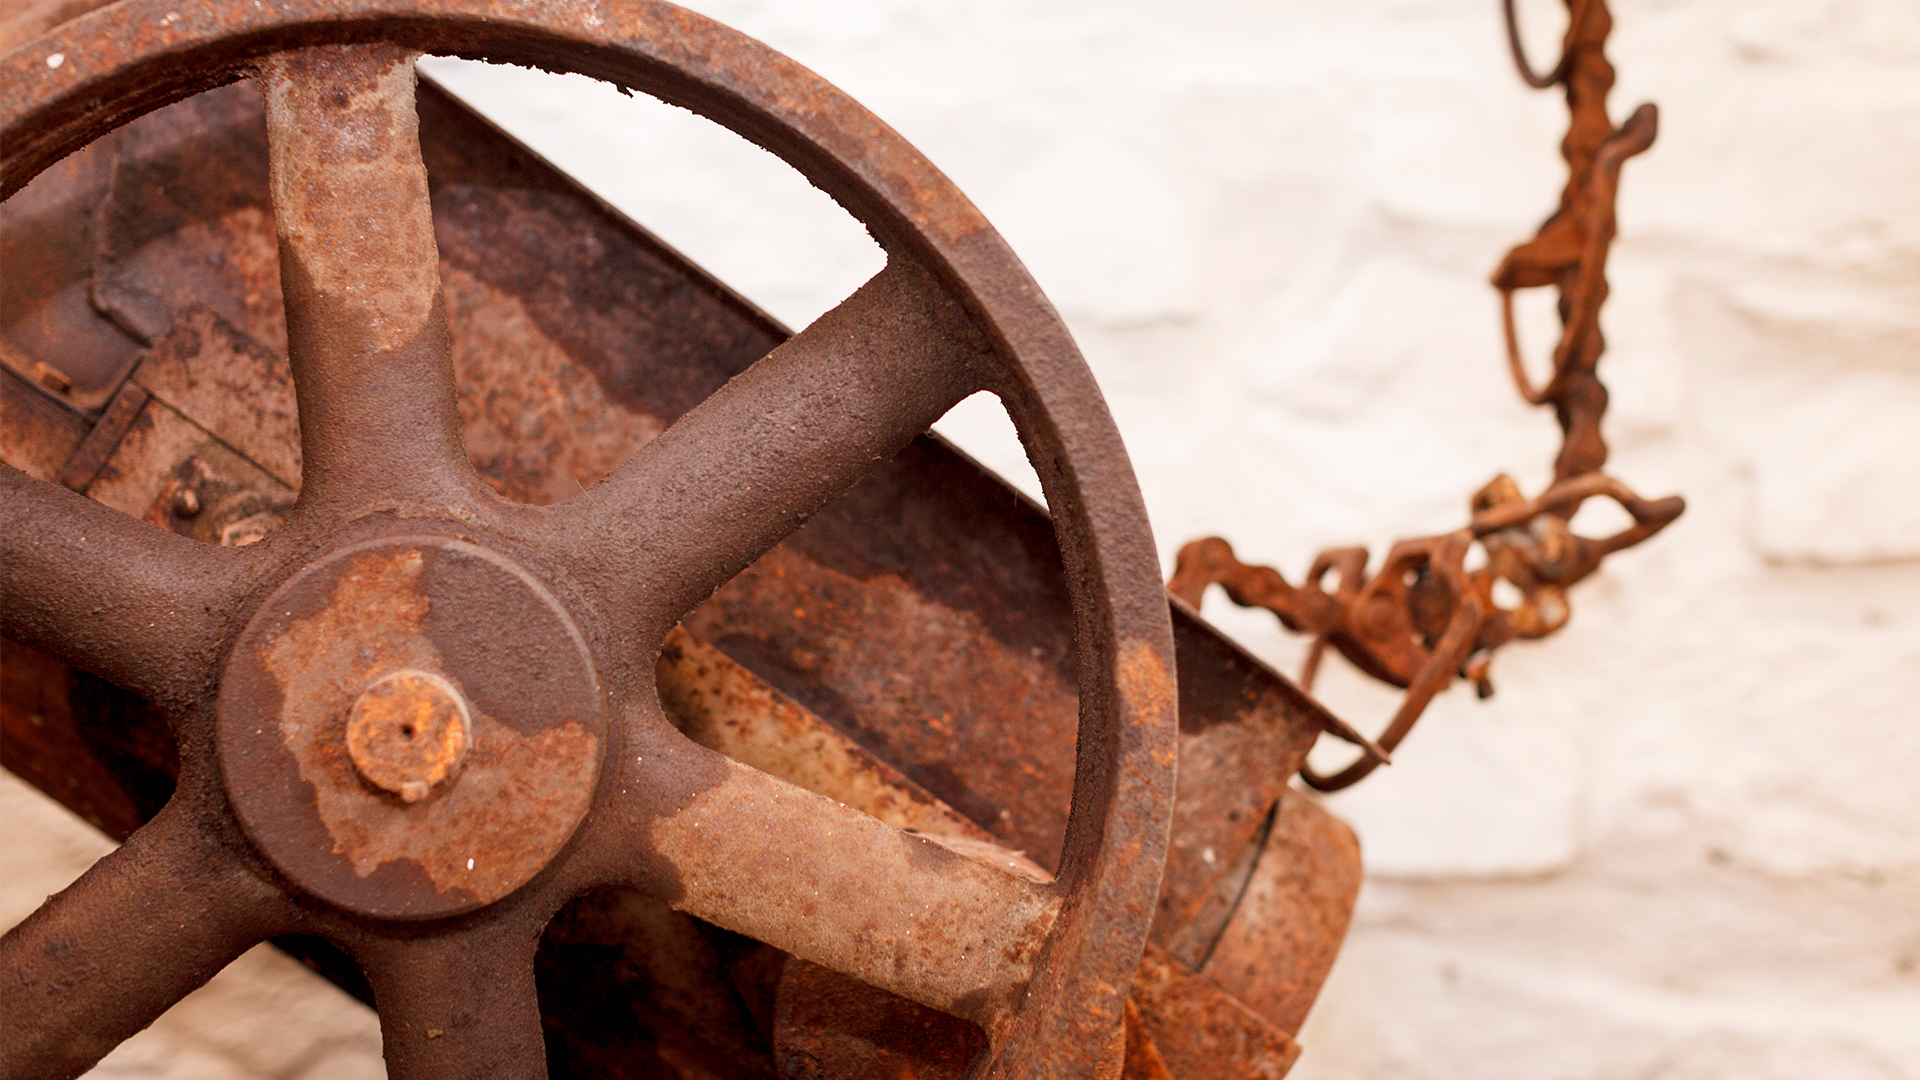 A detail of a rusted piece of machinery displaying the building's historical past